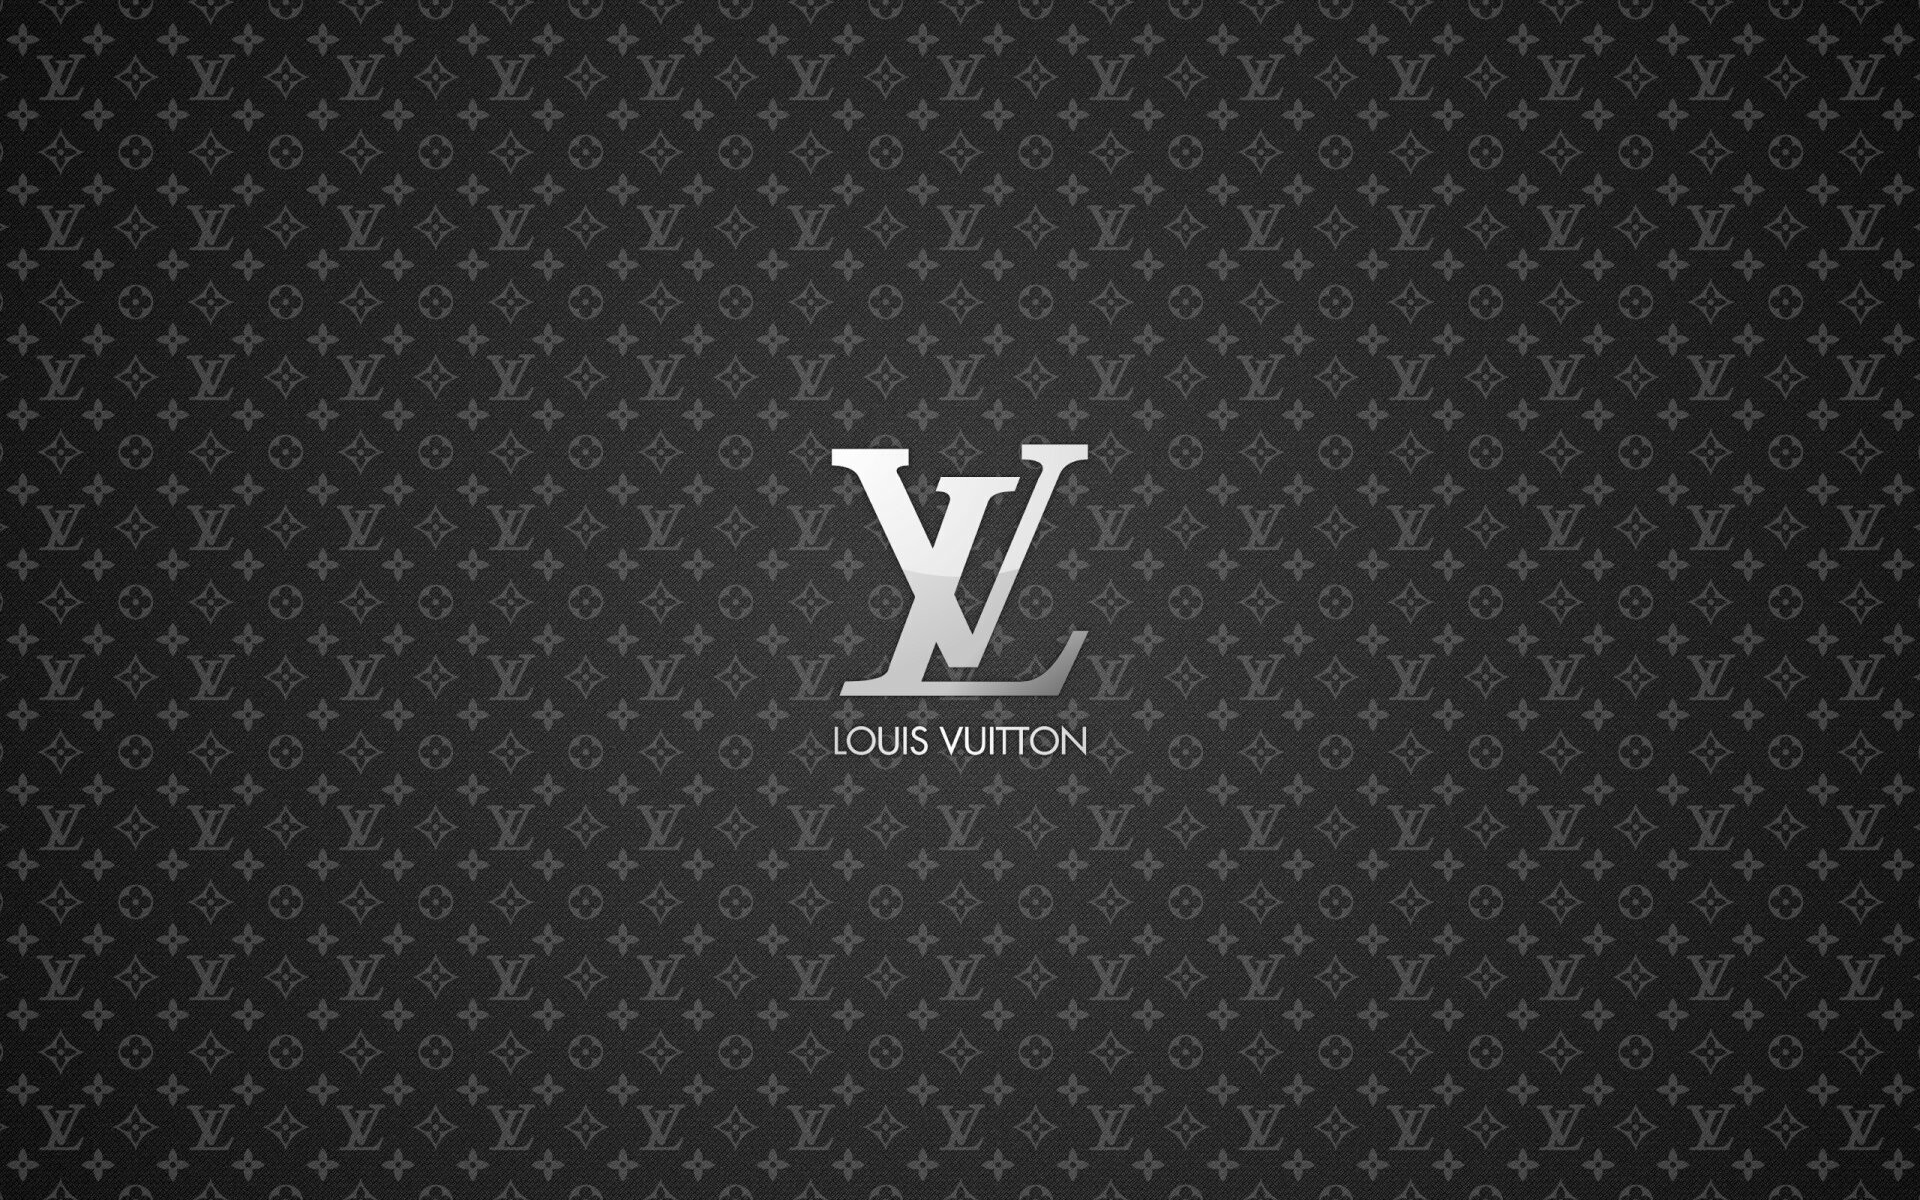 Louis Vuitton: The company introduced the Steamer Bag in 1901. 1920x1200 HD Wallpaper.